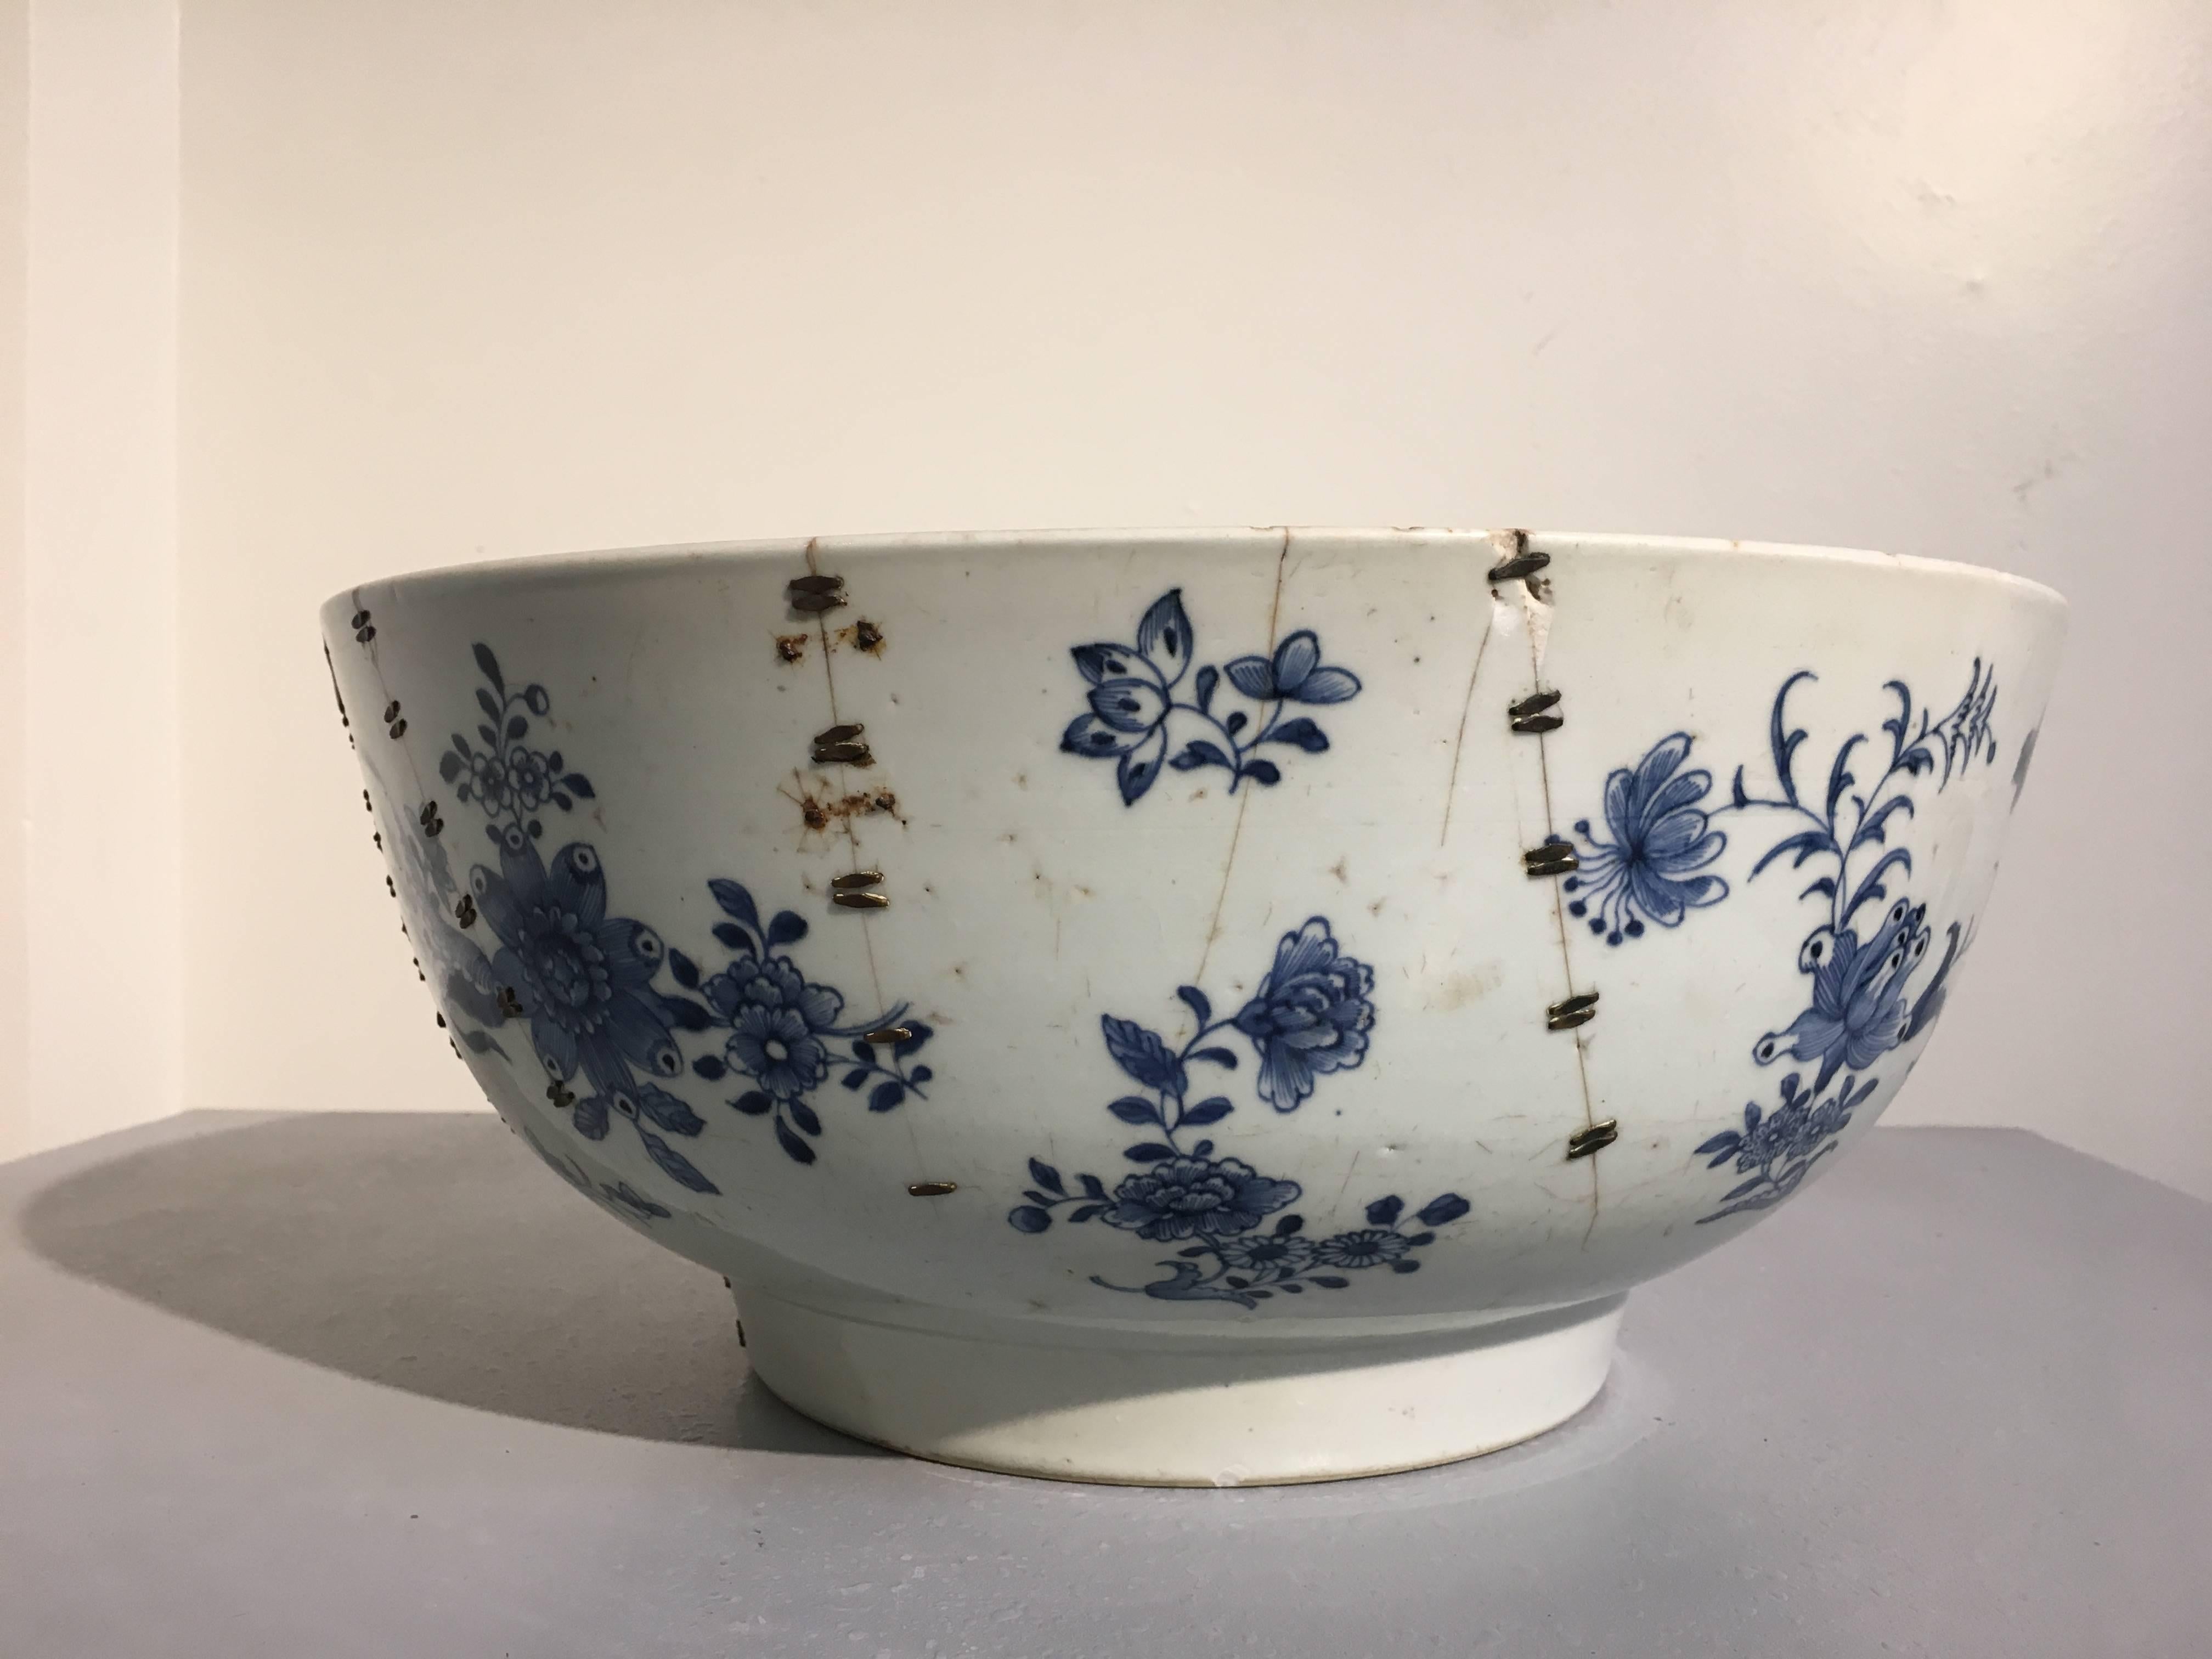 A remarkable large Chinese export blue and white punchbowl painted with a floral and brocade design, and featuring a stunning staple repair, 18th century, China. 

While of large size and beautifully painted, what makes this piece exceptional is the